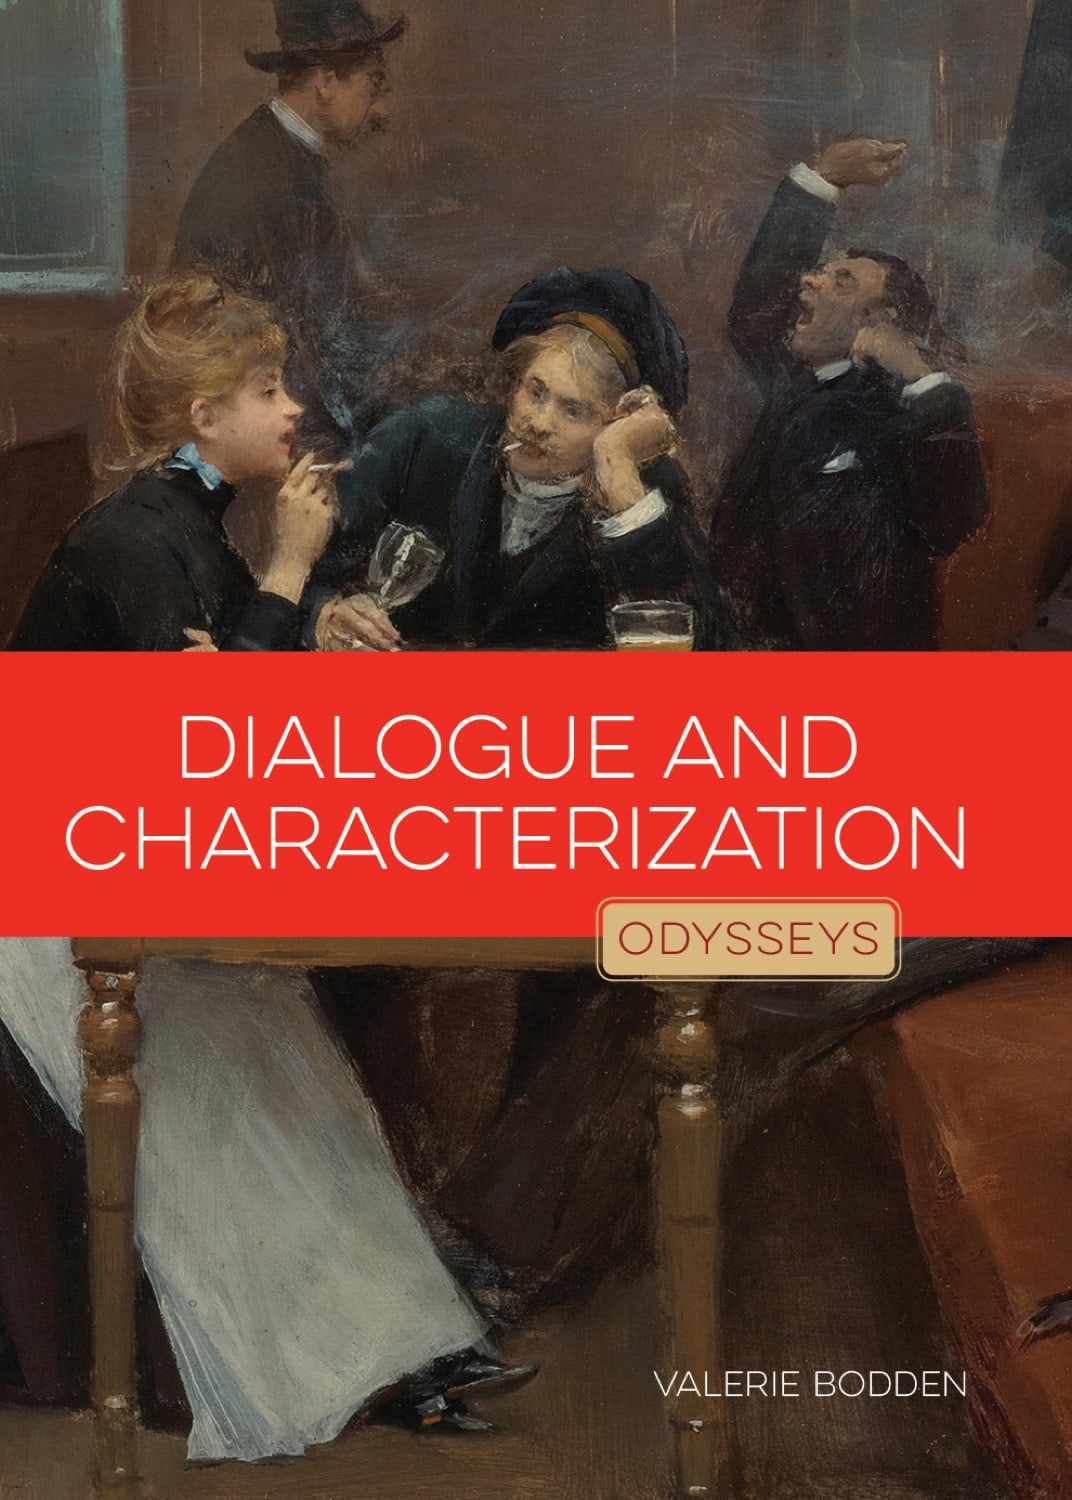 Odysseys in Prose: Dialogue and Characterization